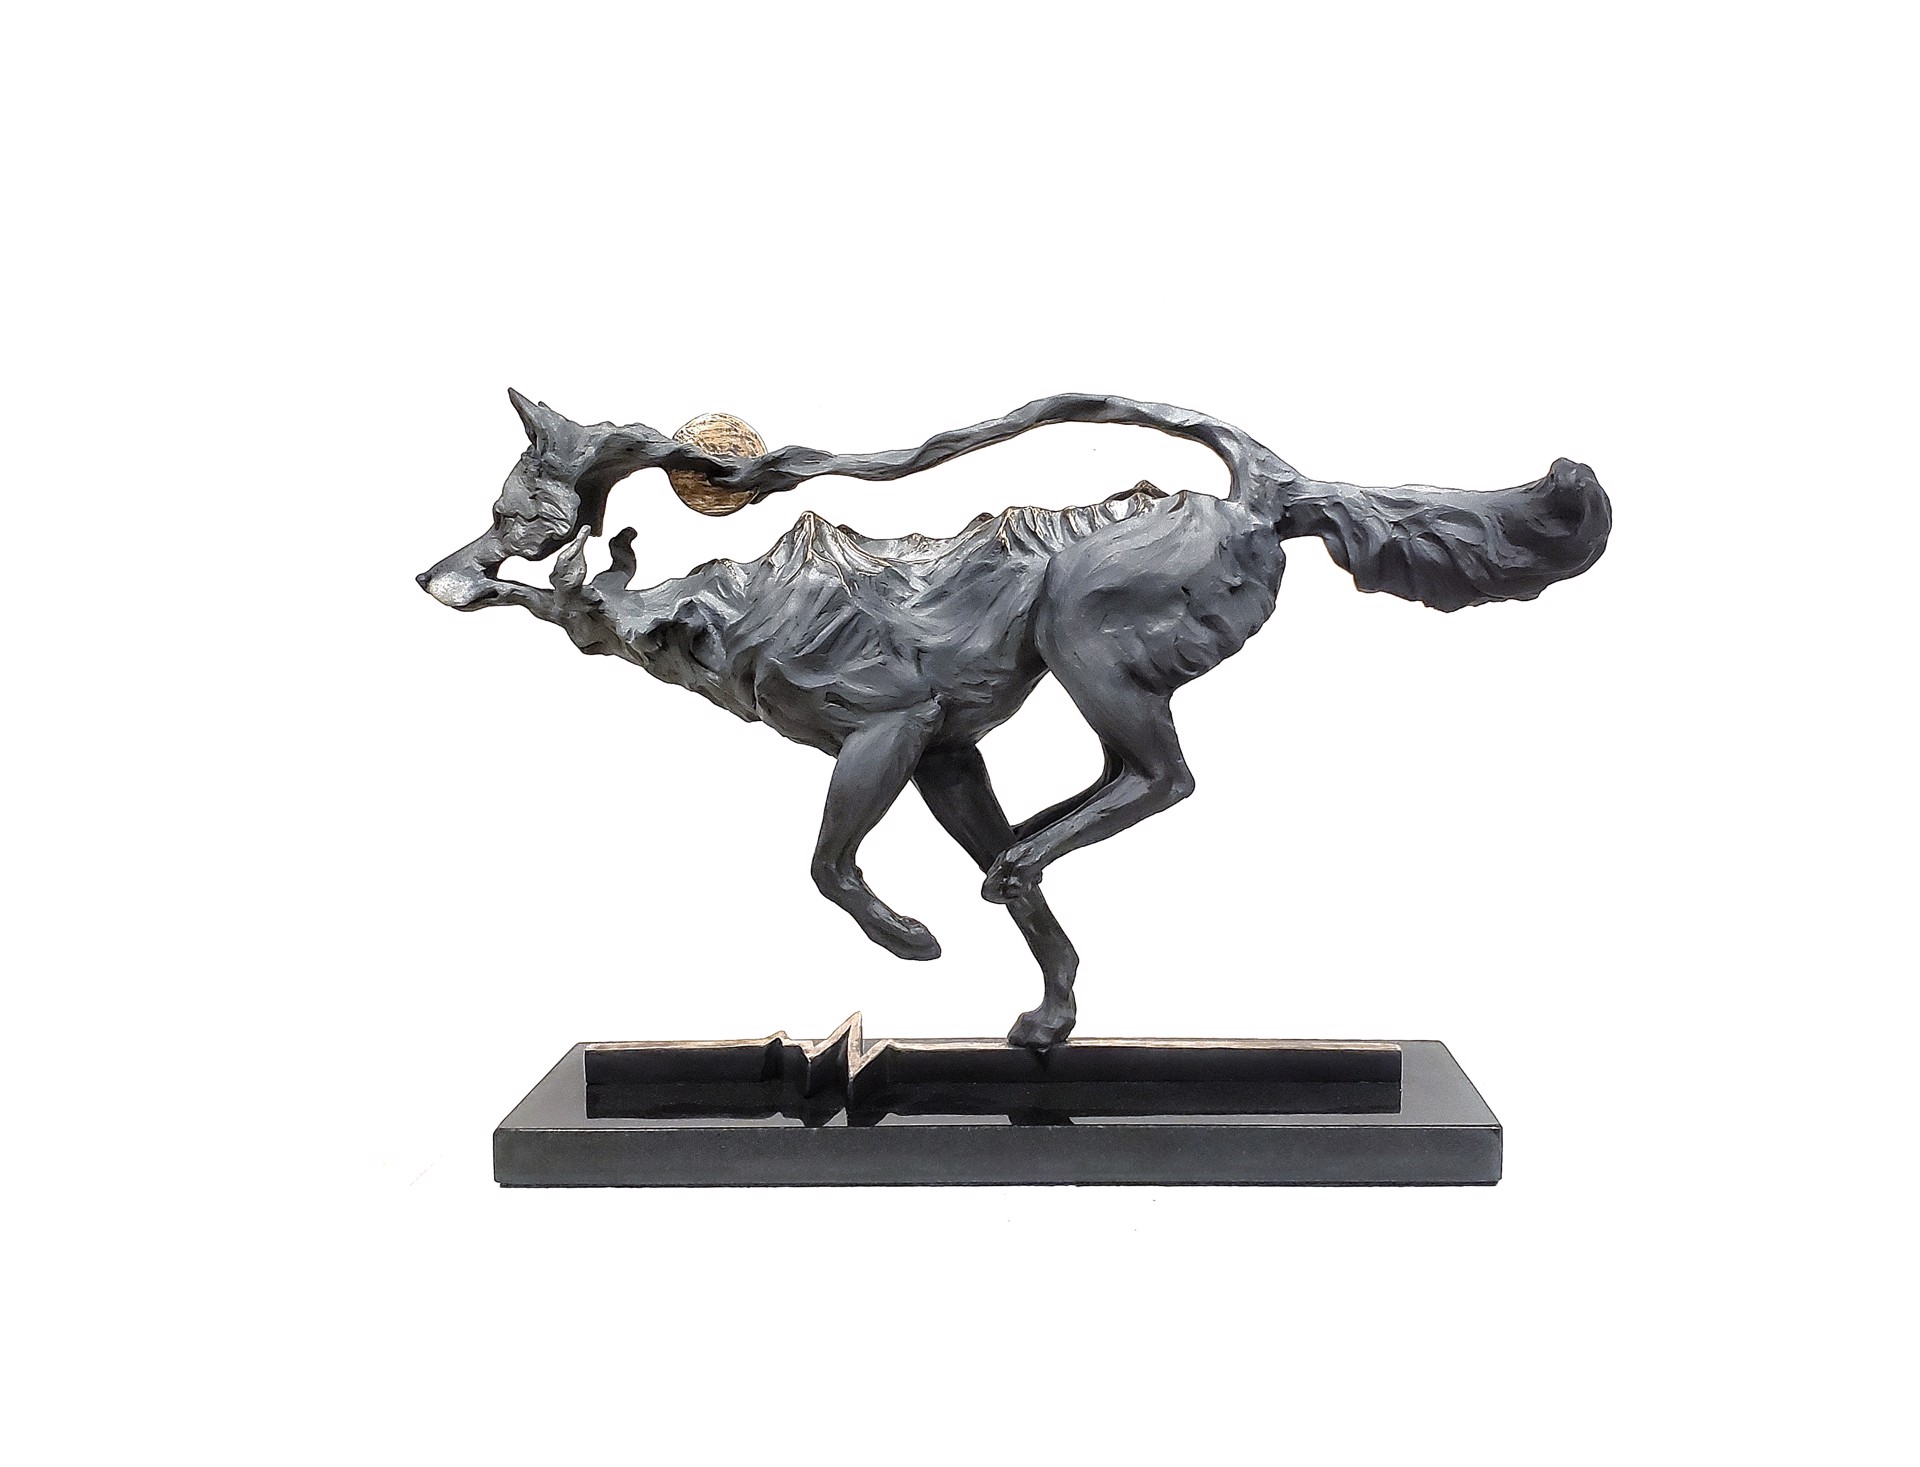 Bronze Sculpture Of A Running Wolf With Mountain Range And Full Moon Embedded In Body In Running Pose On Dark Rectangular Stand